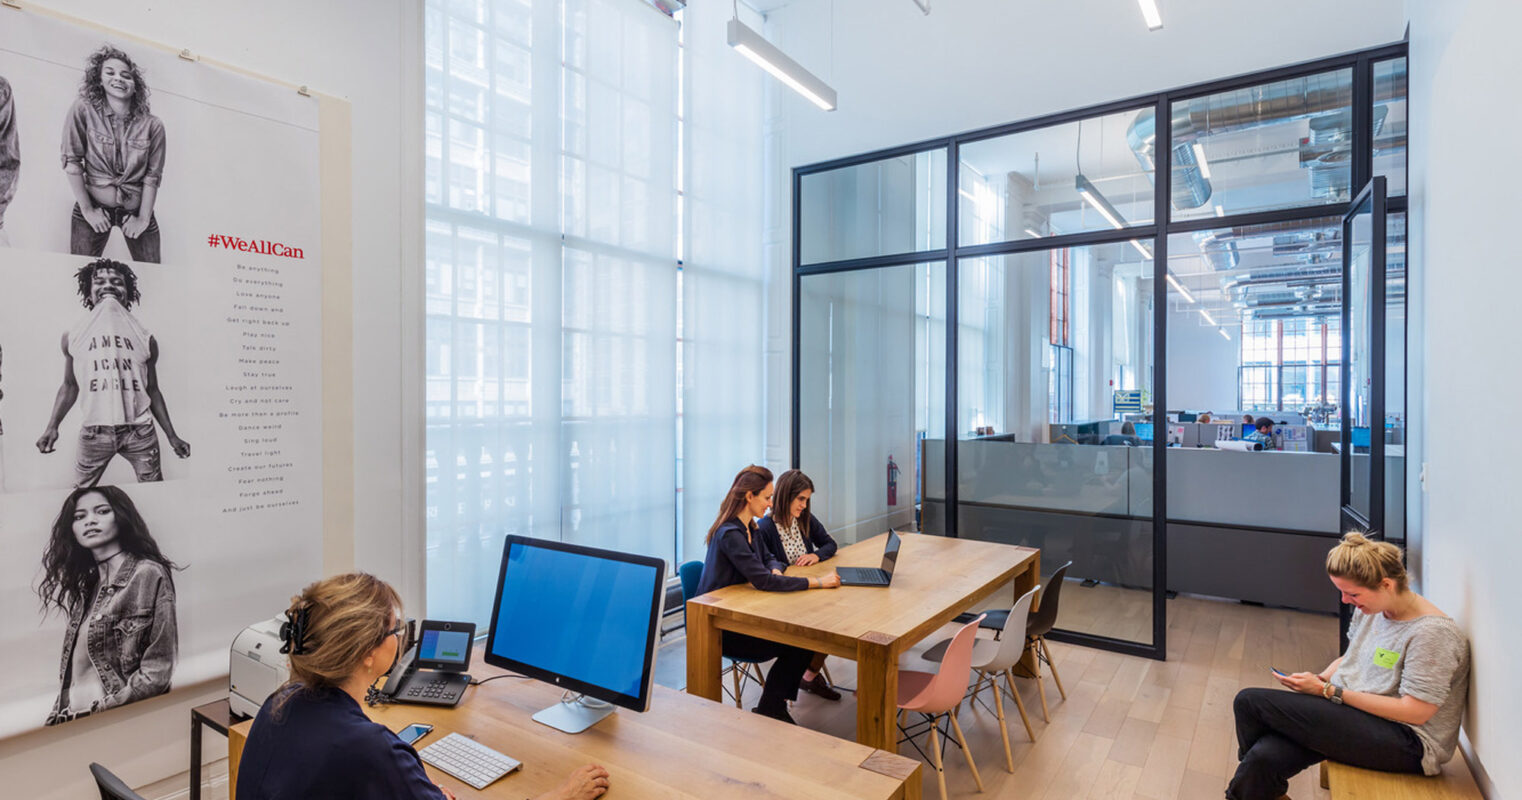 Modern office space featuring a minimalist wooden table with workers on laptops, surrounded by white walls adorned with large format art, expansive windows providing ample natural light, and clear glass partitionings enhancing the open-plan design aesthetic.